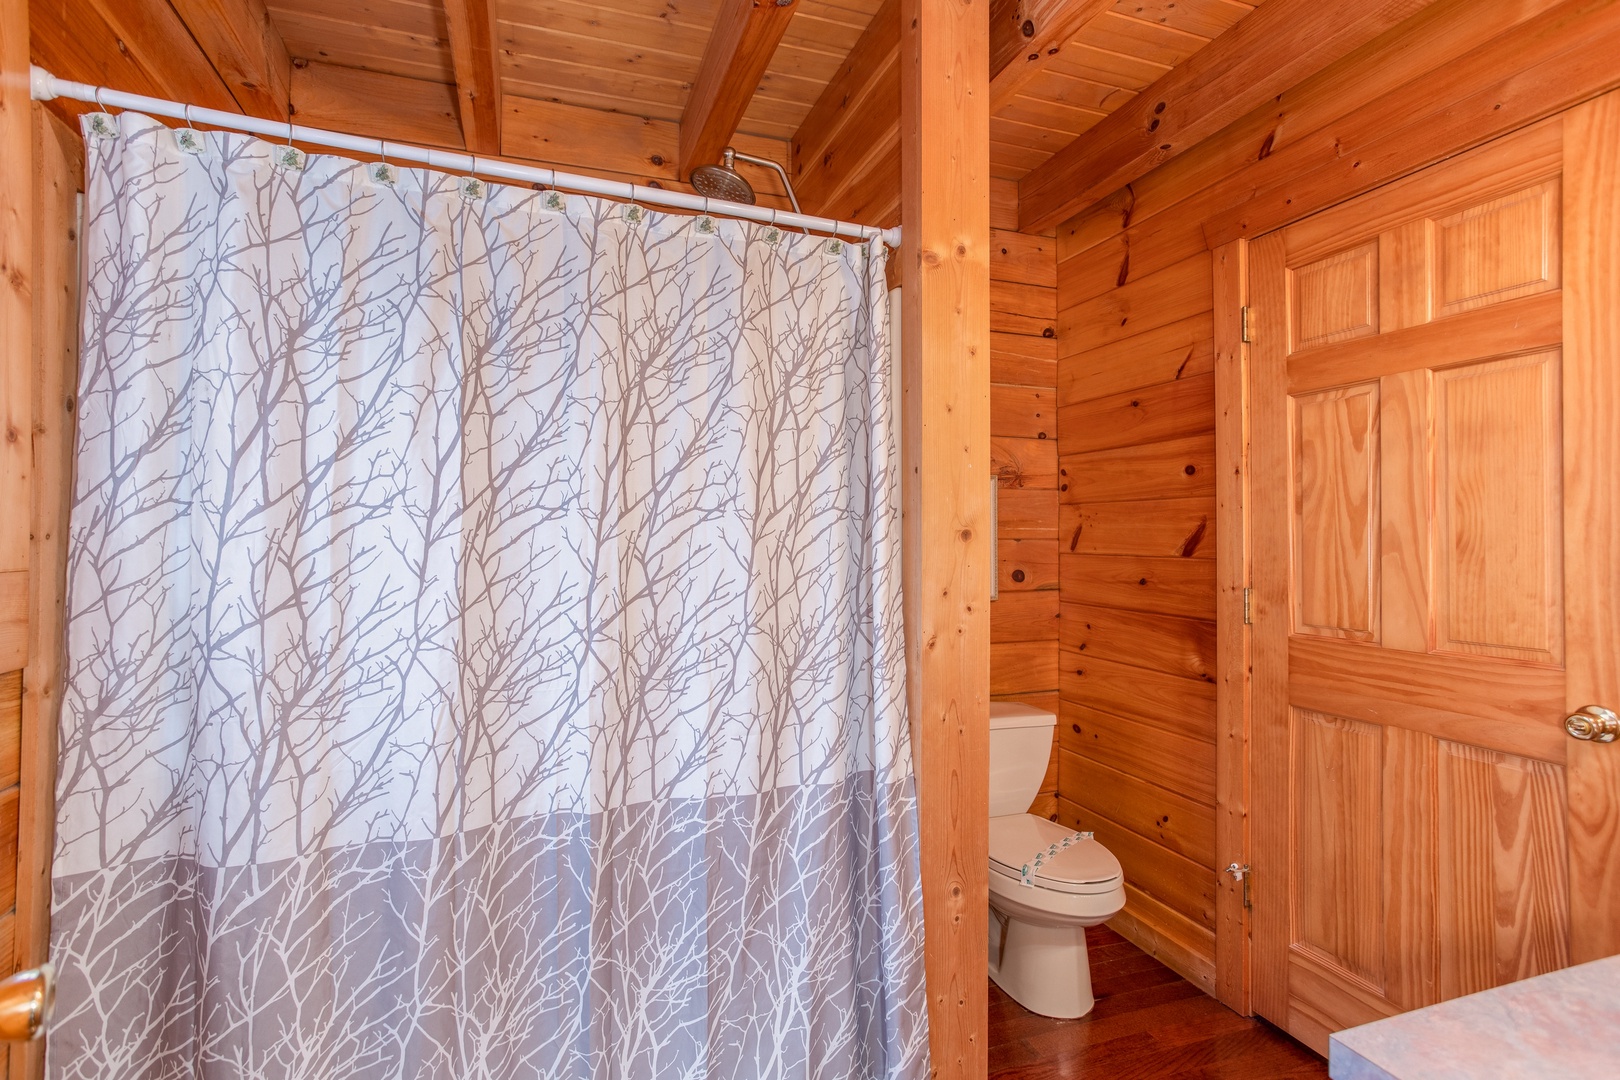 Bathroom with a tub and shower at Enchanted Evening, a 1-bedroom cabin rental located in Pigeon Forge